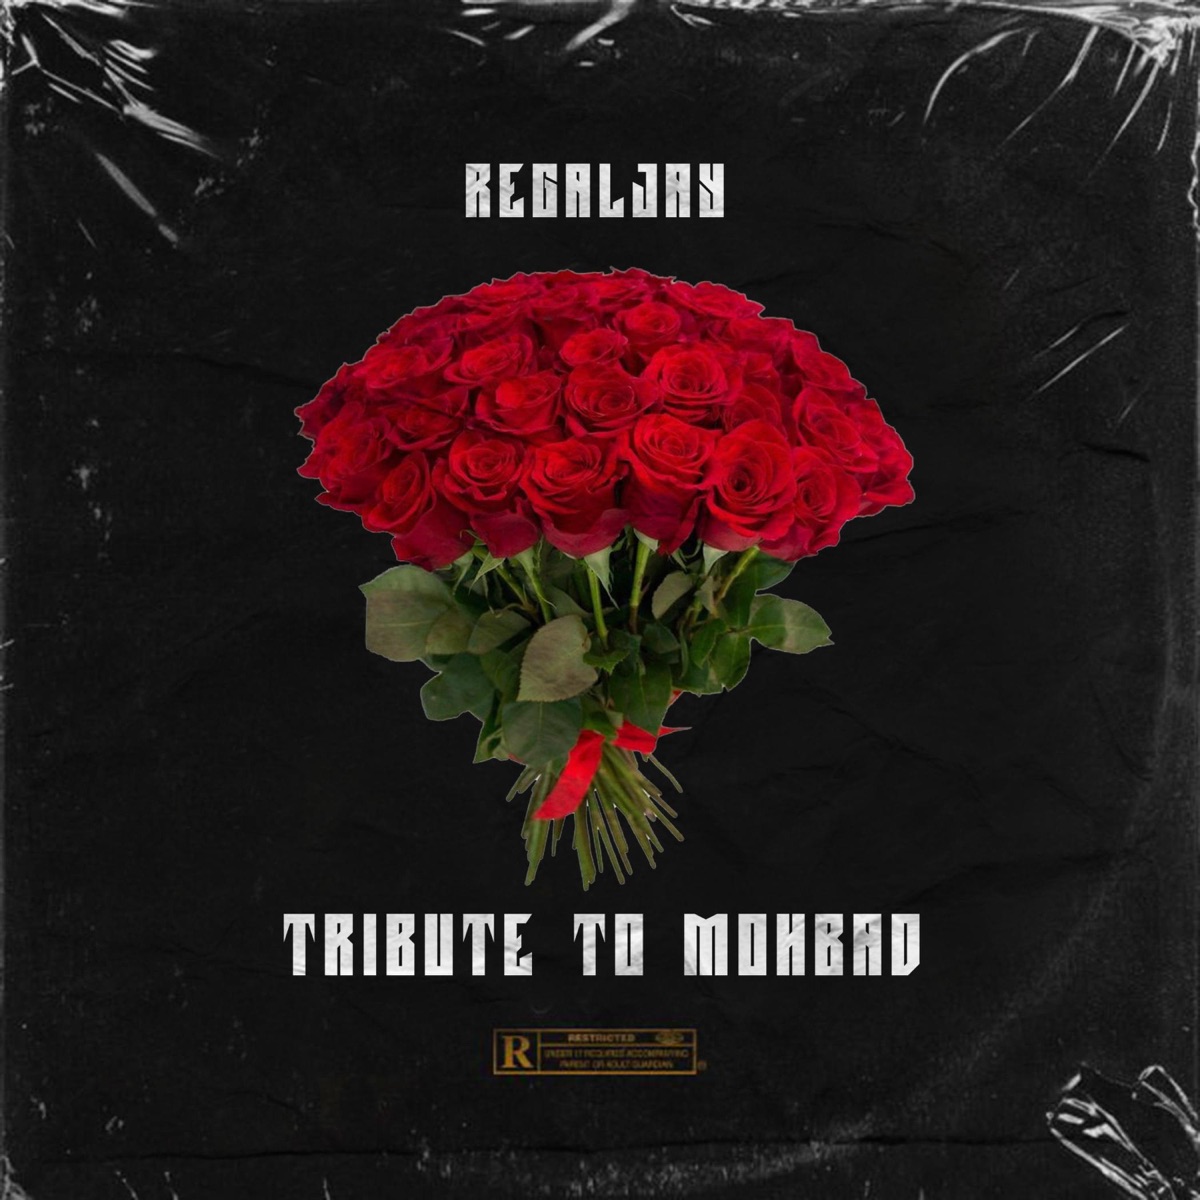 MP3: RegalJay – Tribute To Mohbad